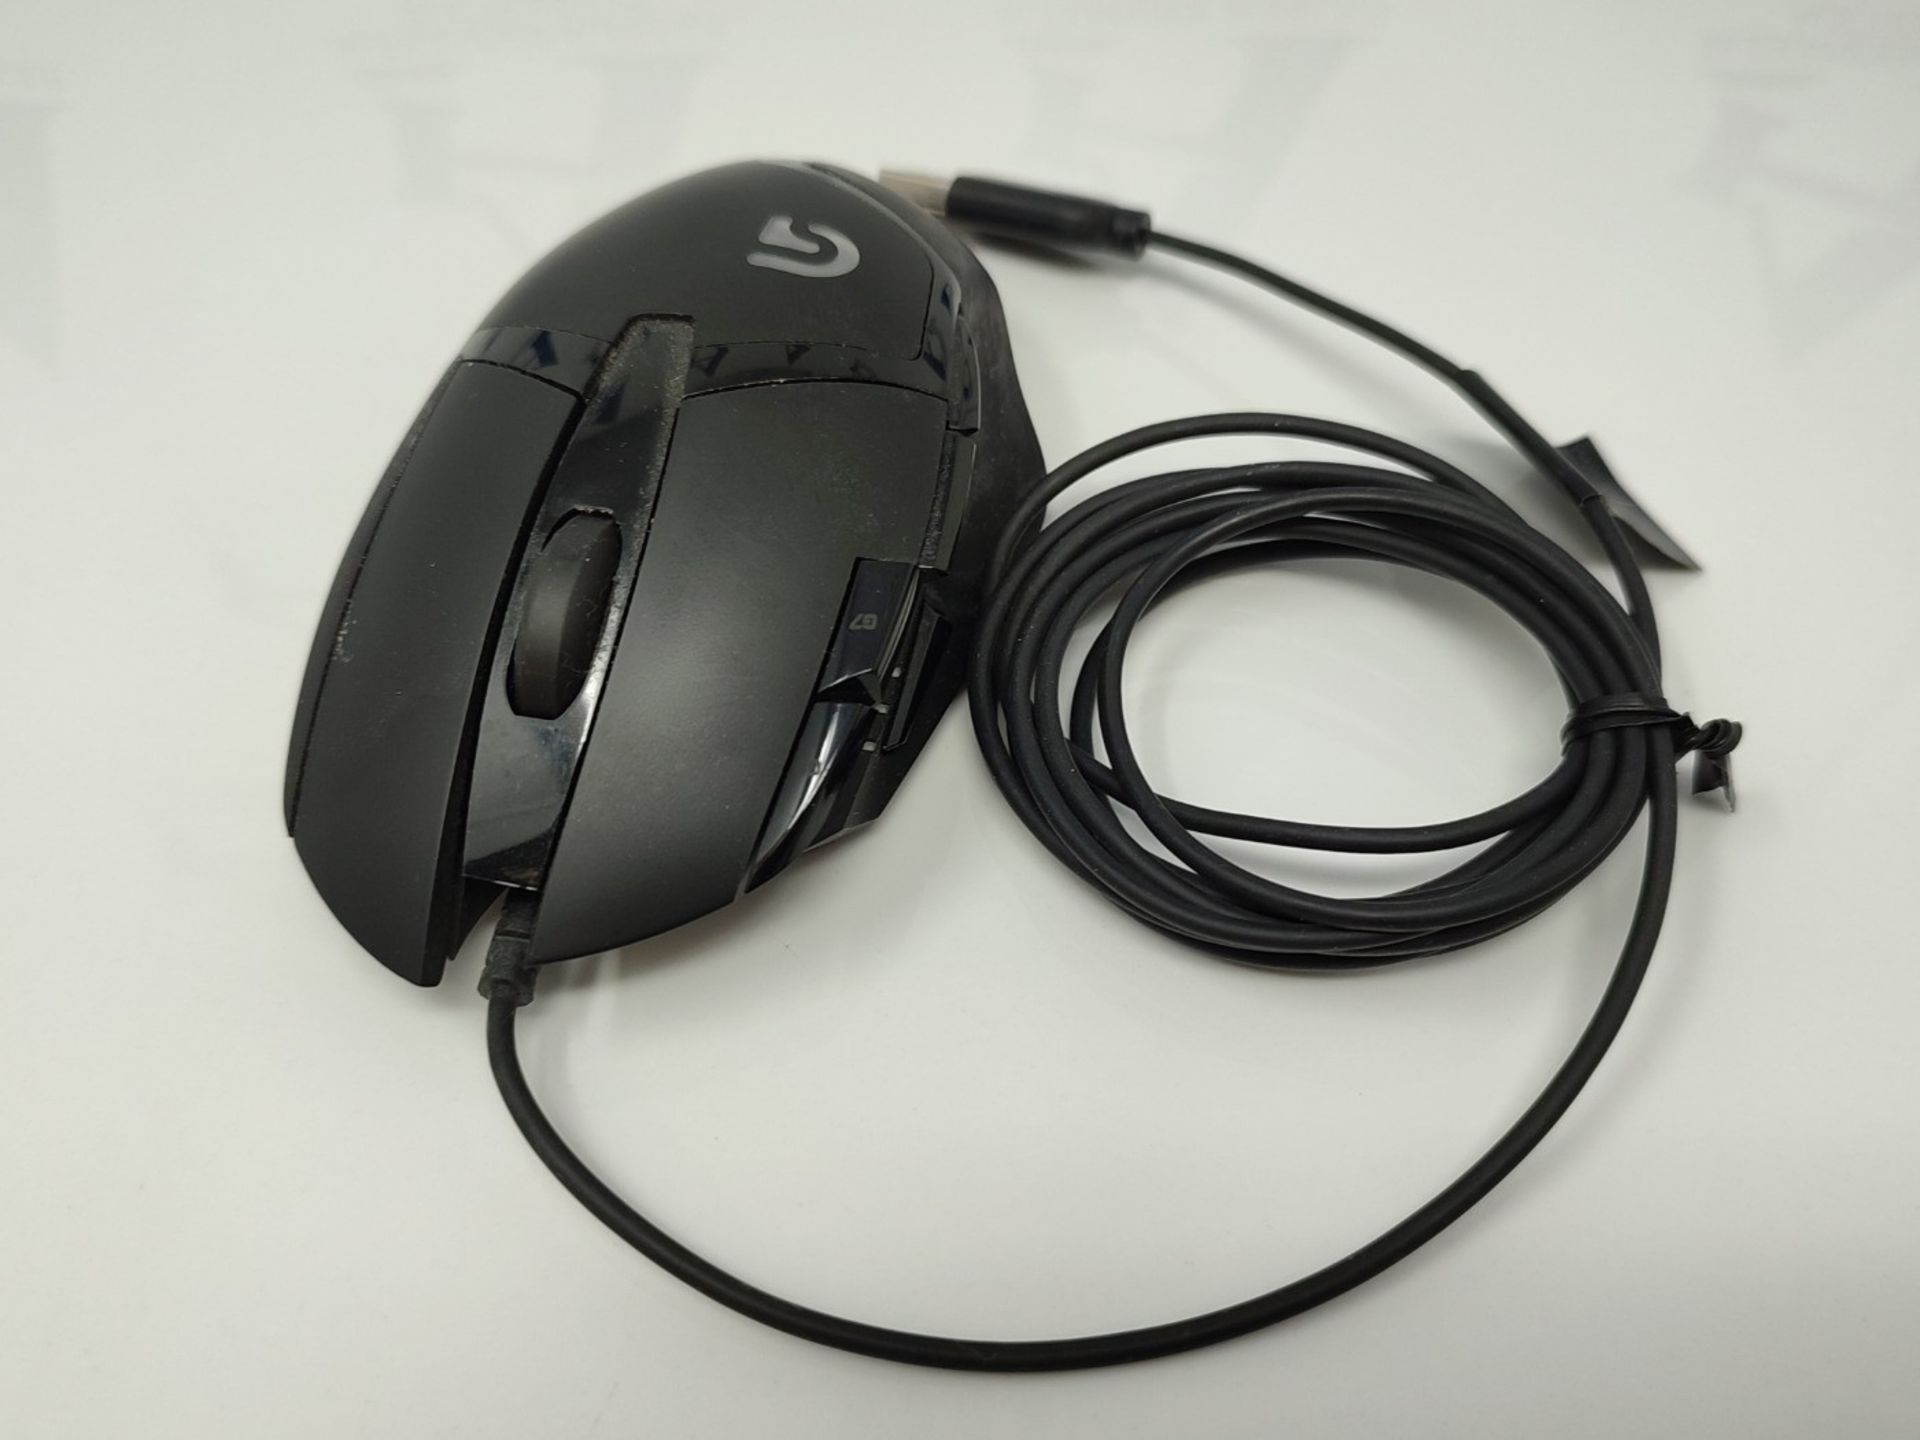 Logitech G402 Hyperion Fury Wired Gaming Mouse, Optical Tracking 4,000 DPI, Ultra-Ligh - Image 3 of 3